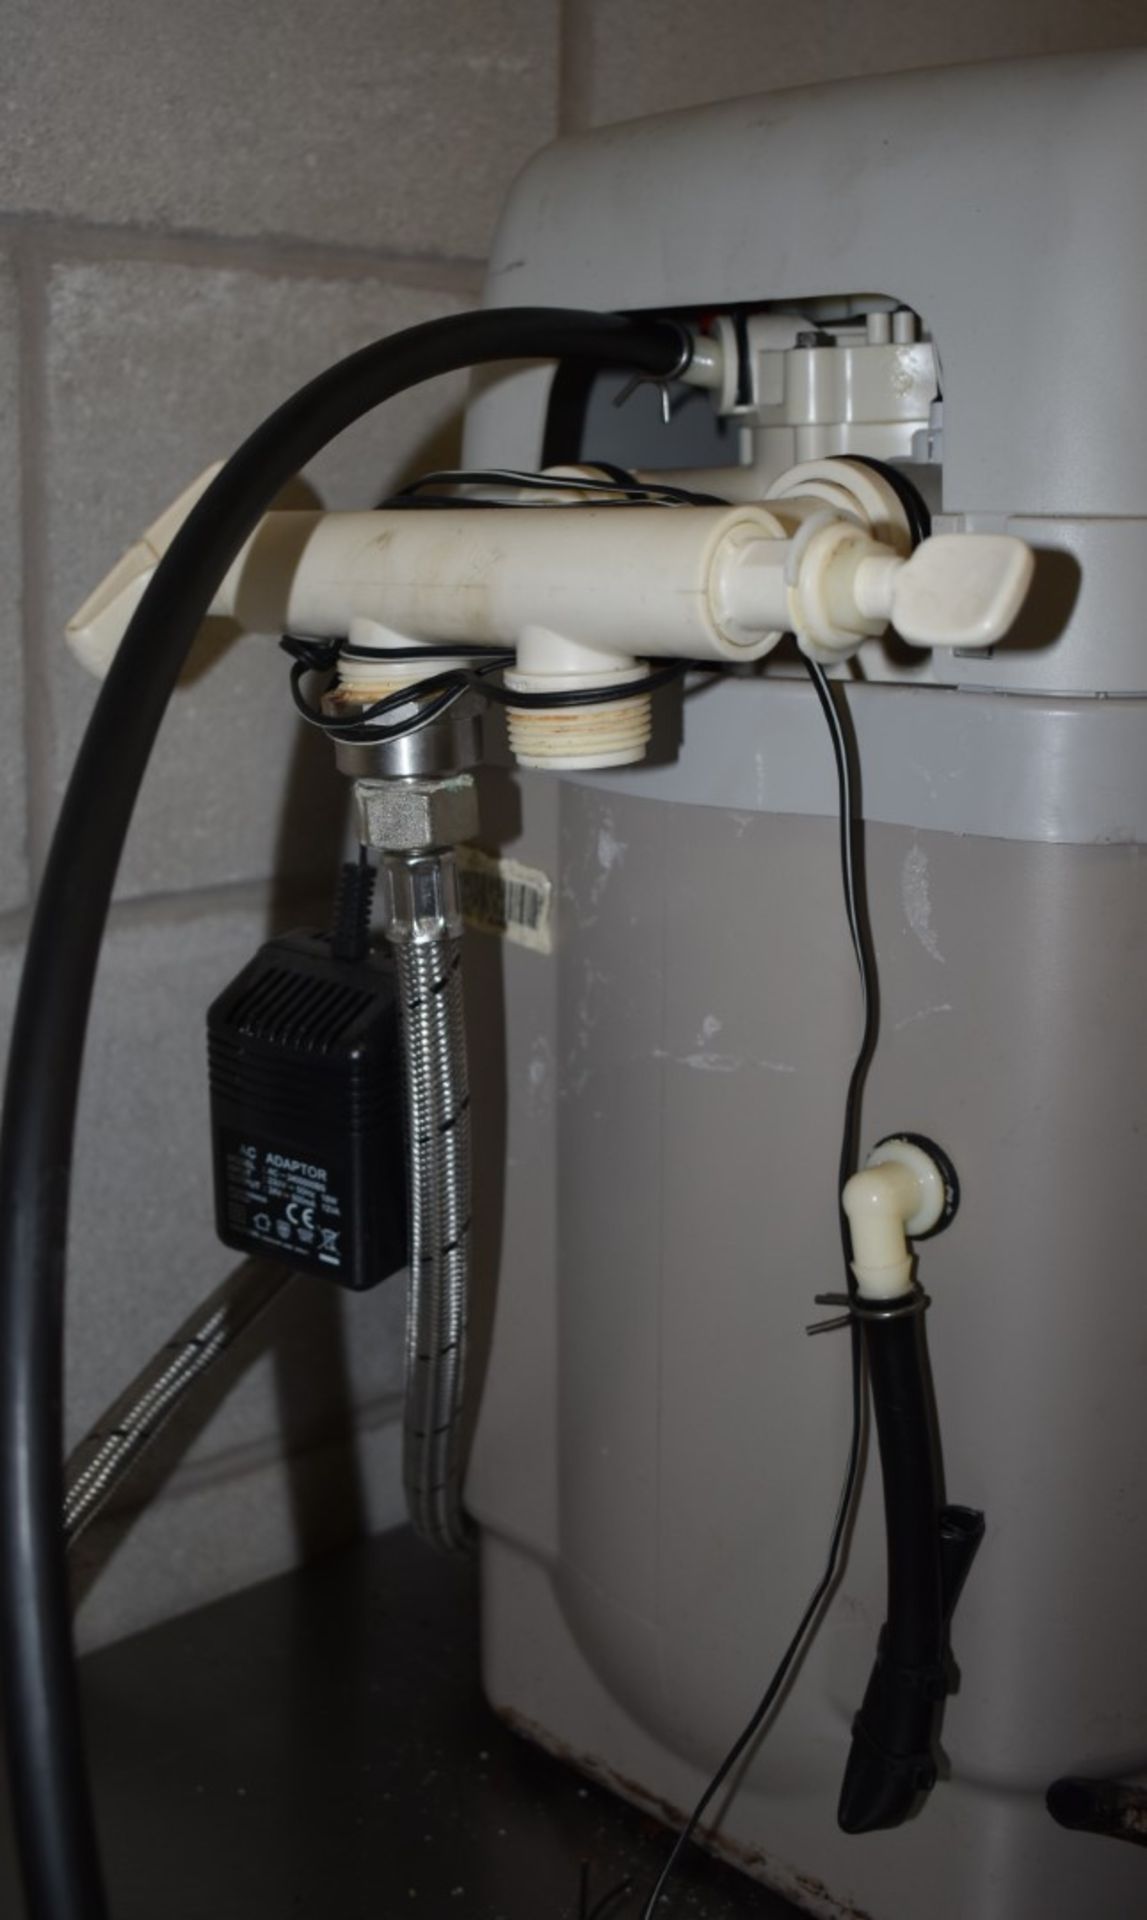 1 x Tap Works Water Softener - Ecowater Systems for LaCimbali, Faema and Casadio - CL390 - Location: - Image 2 of 3